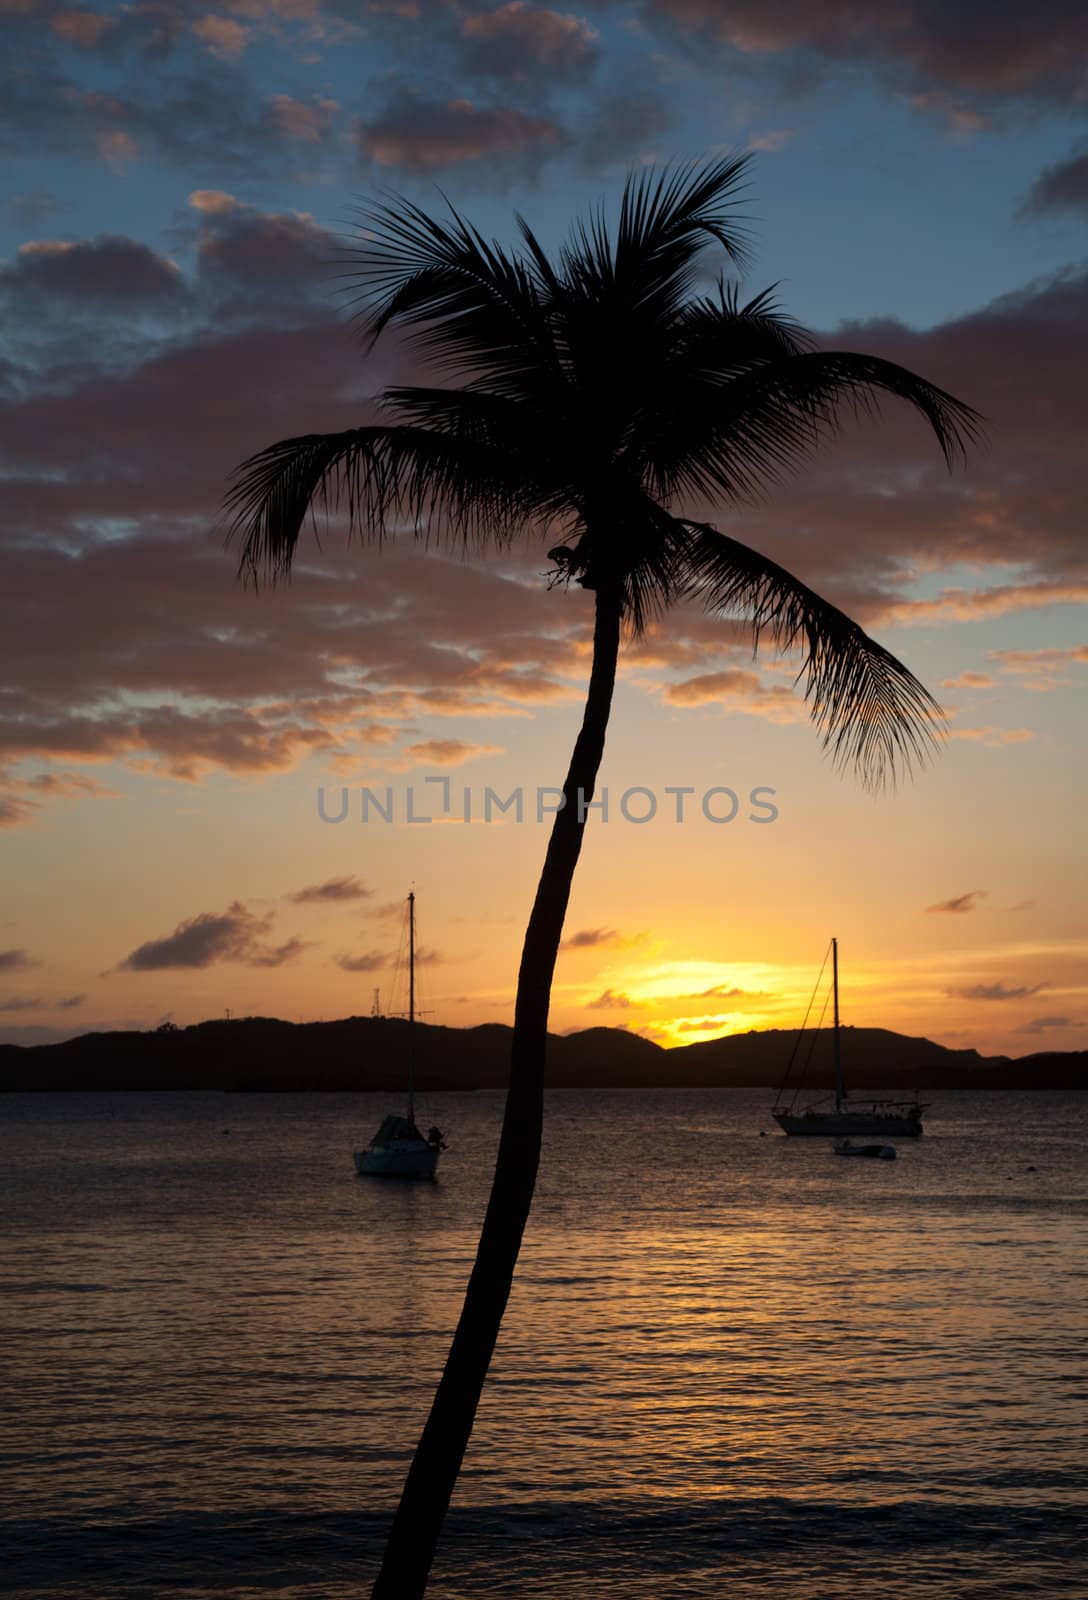 Silhouette of a palm tree in front of the setting sun over the ocean